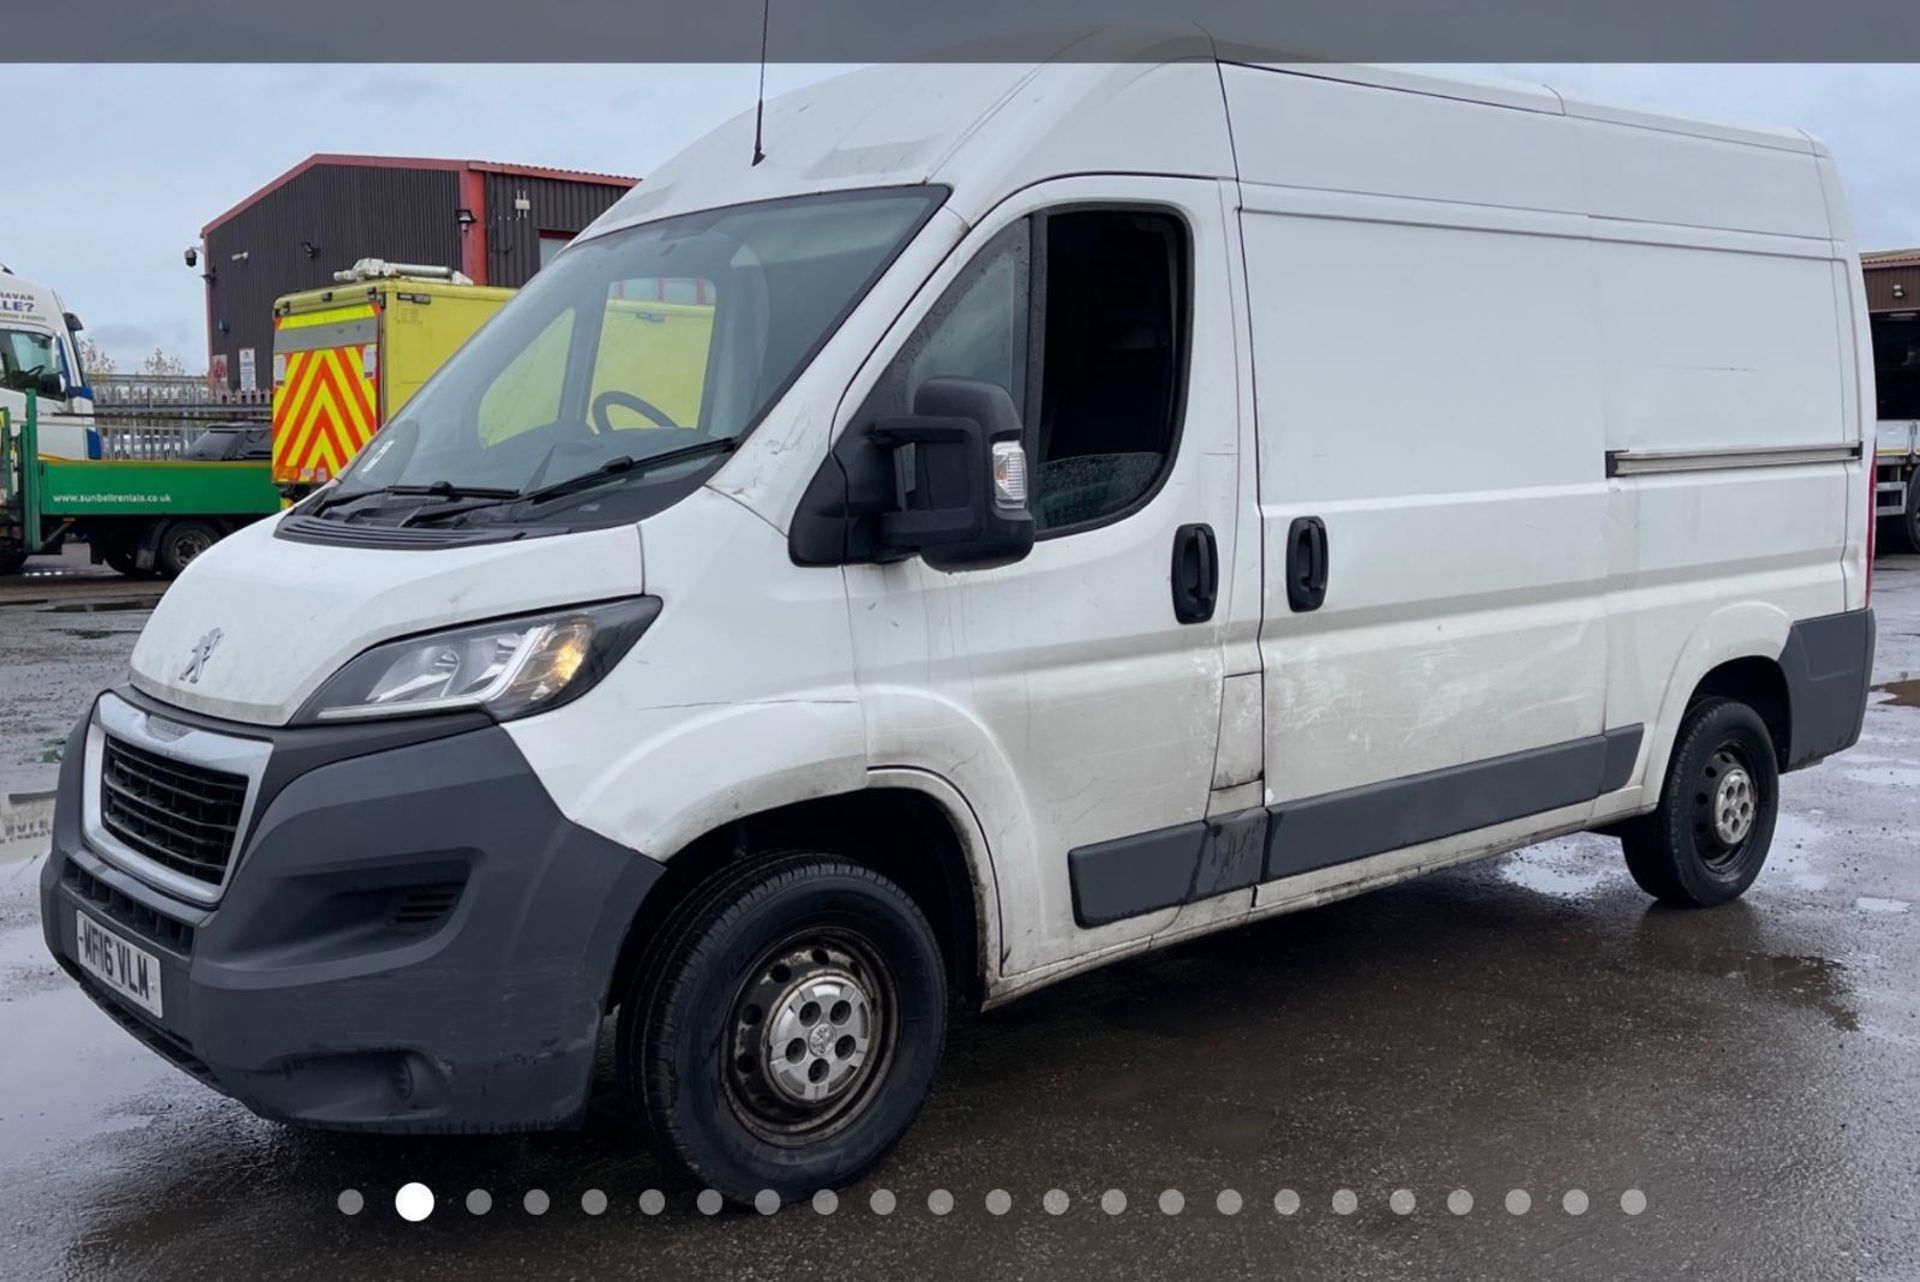 2016 PEUGEOT BOXER- 144 K MILES - HPI CLEAR -READY TO WORK ! - Image 2 of 12